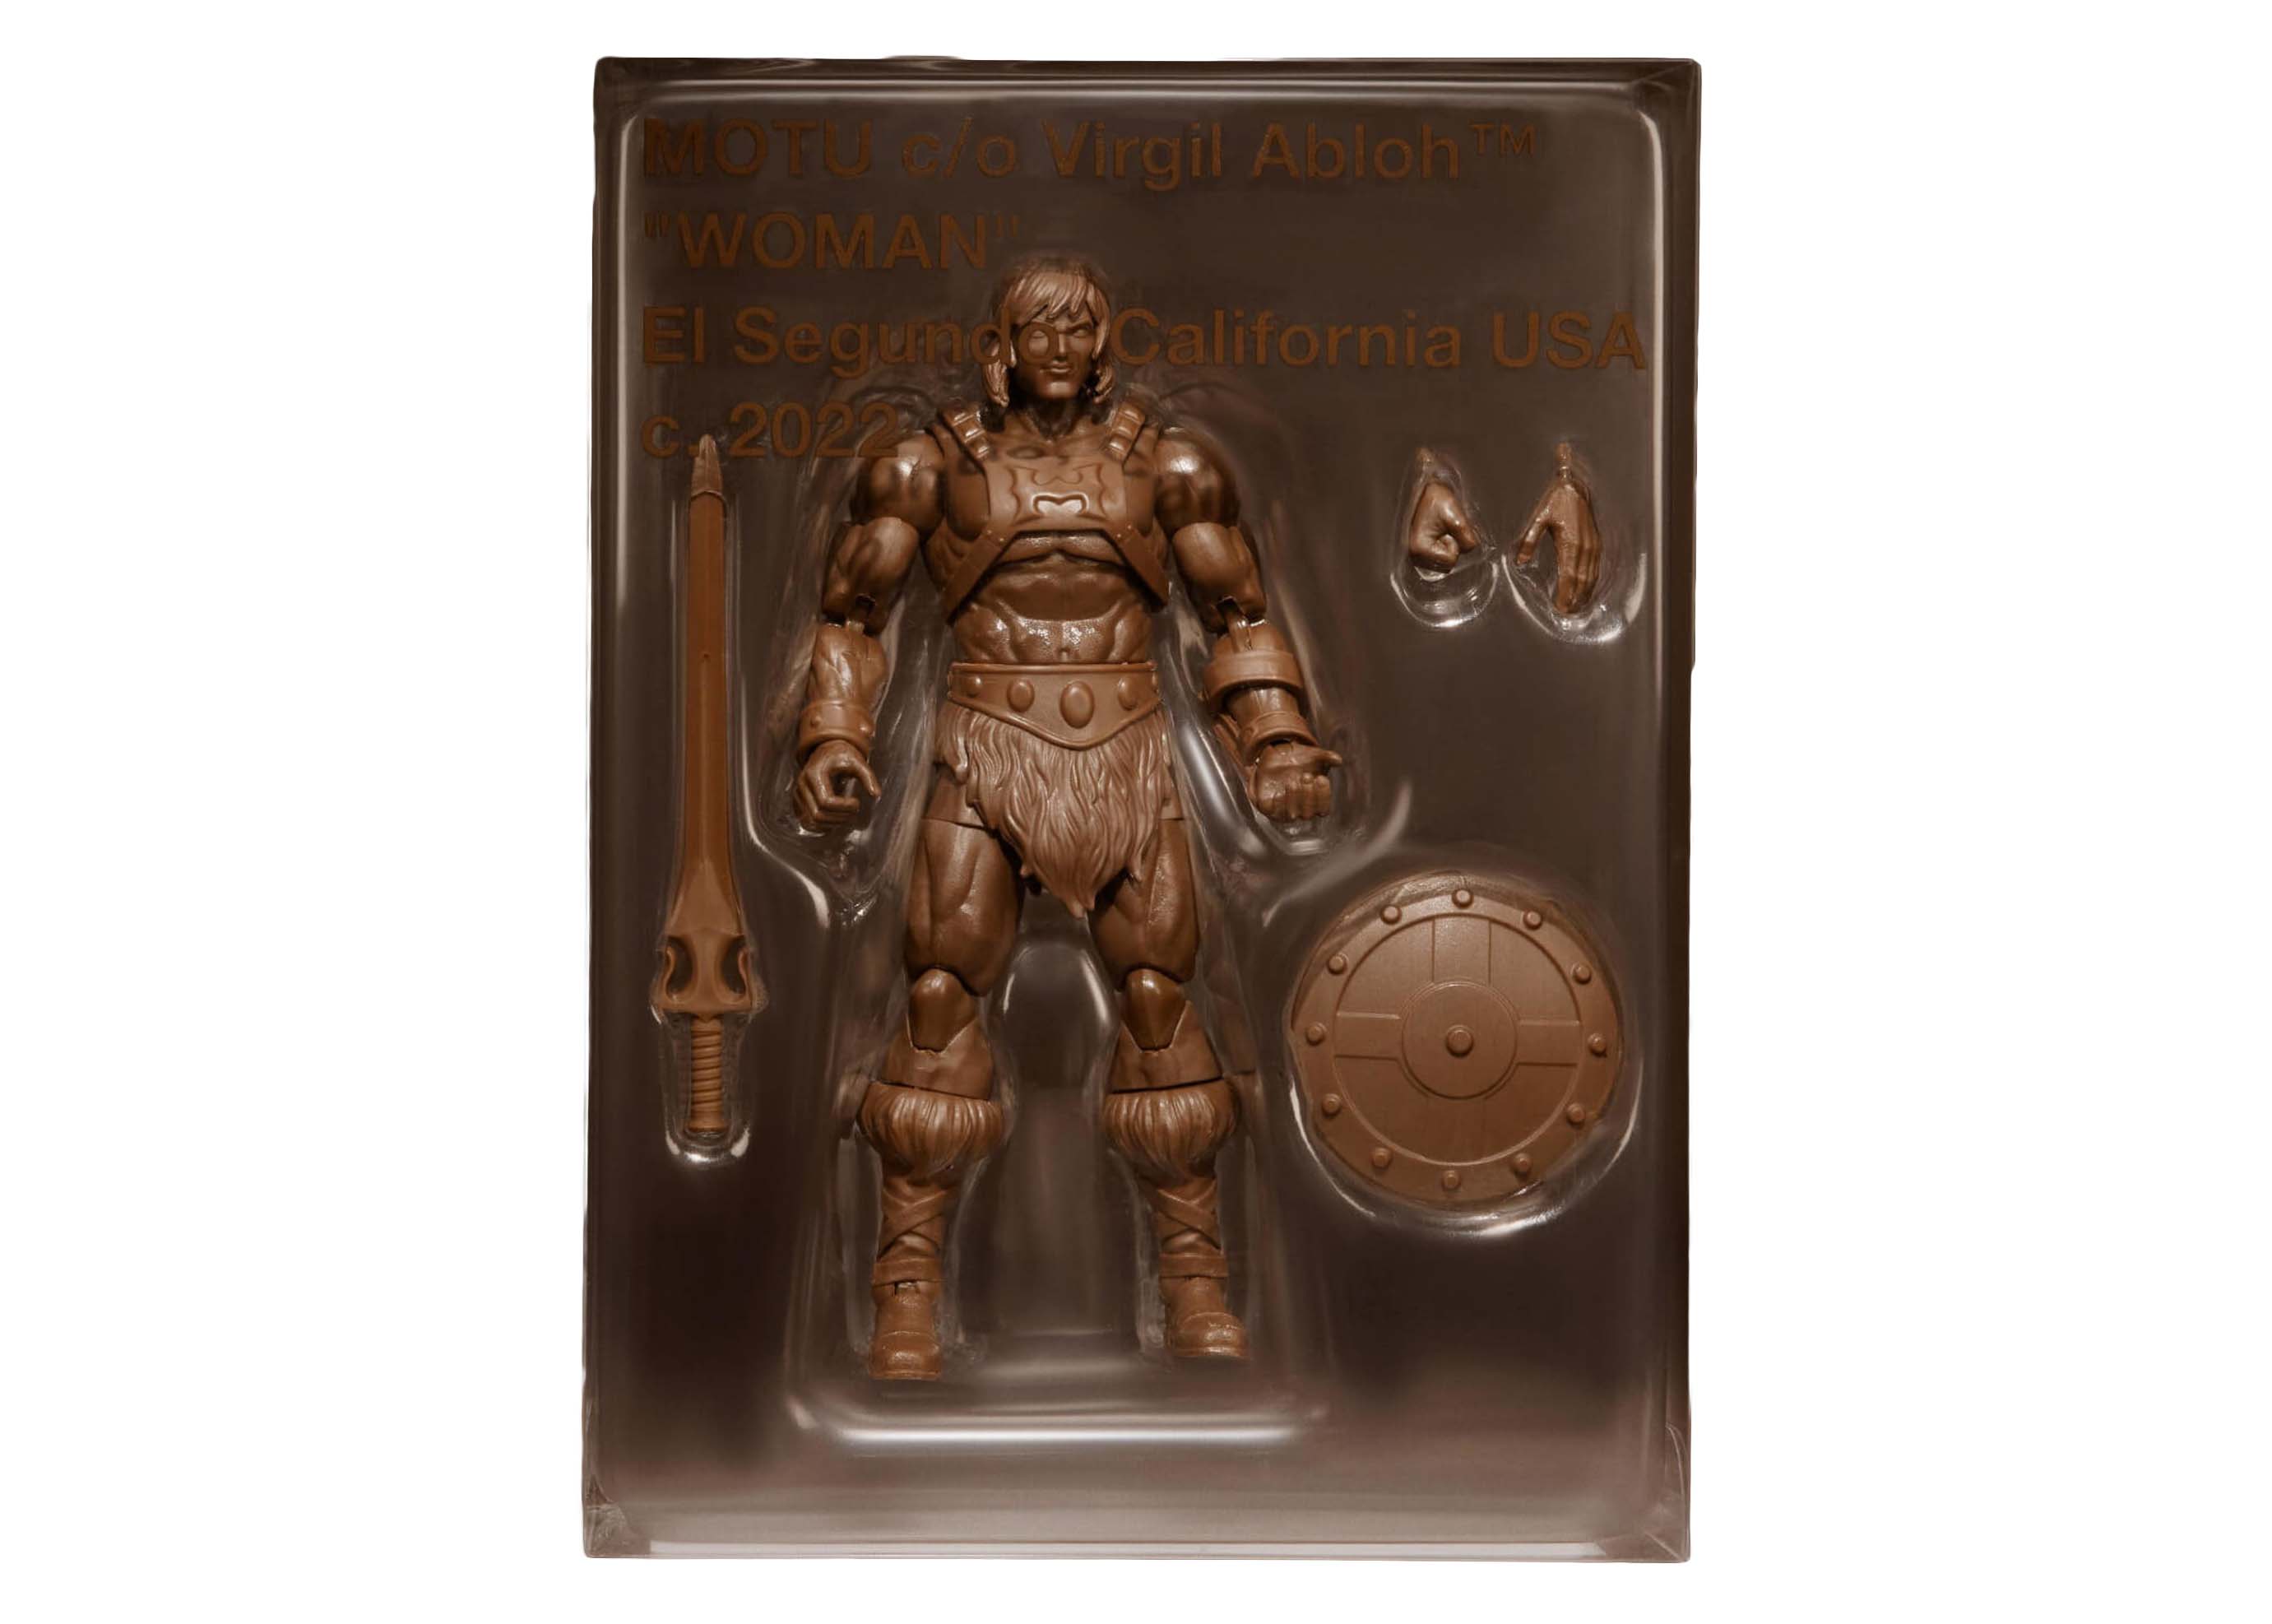 Mattel Virgil Abloh x Masters of the Universe He-Man Collector